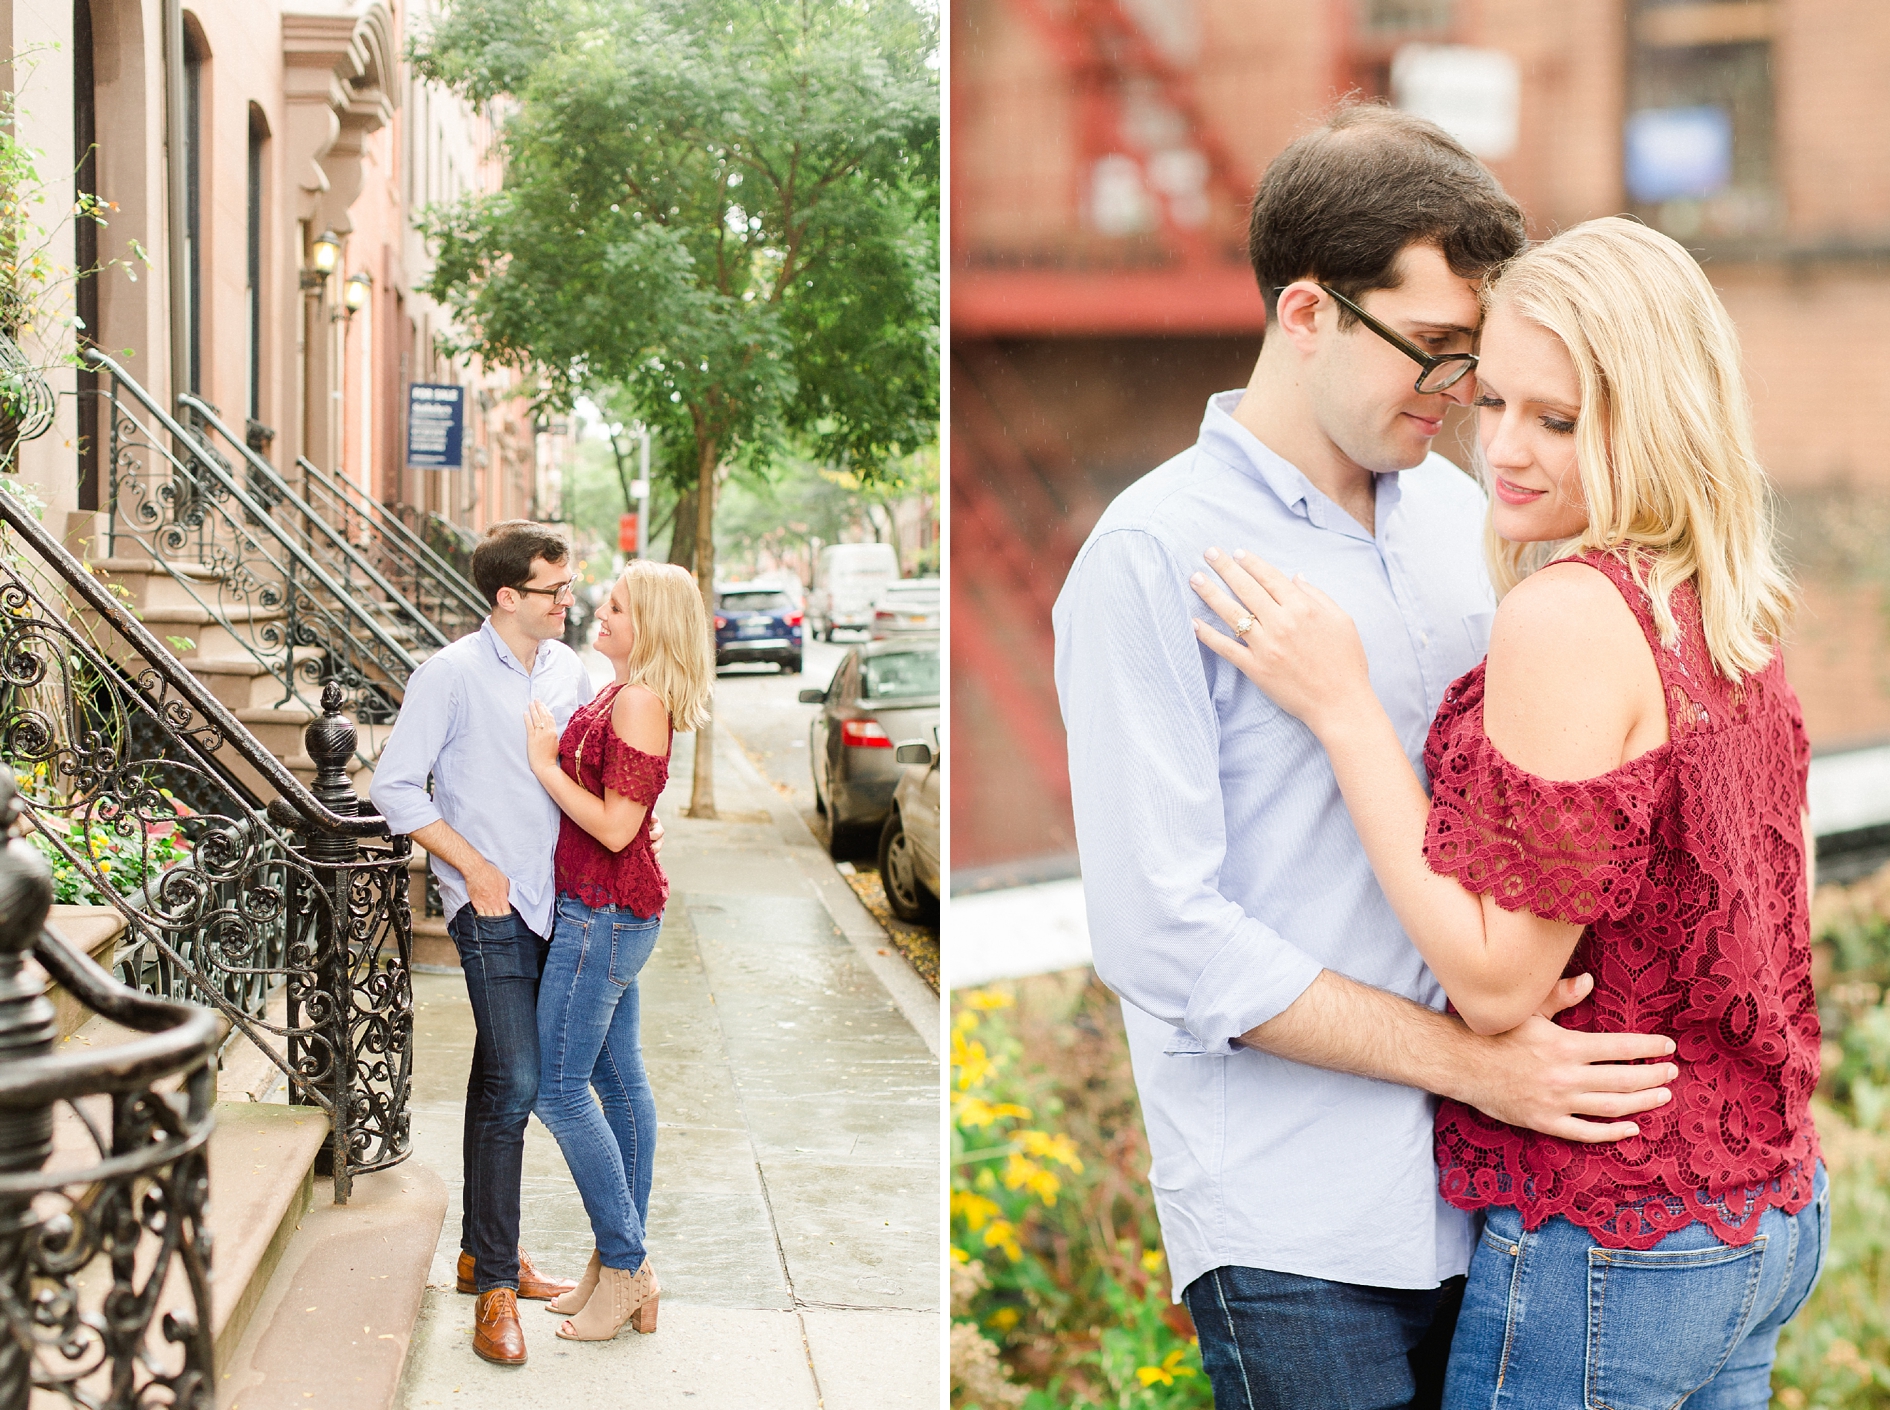 Courtney and Larry | New York City Engagement | © Ailyn La Torre Photography 2017